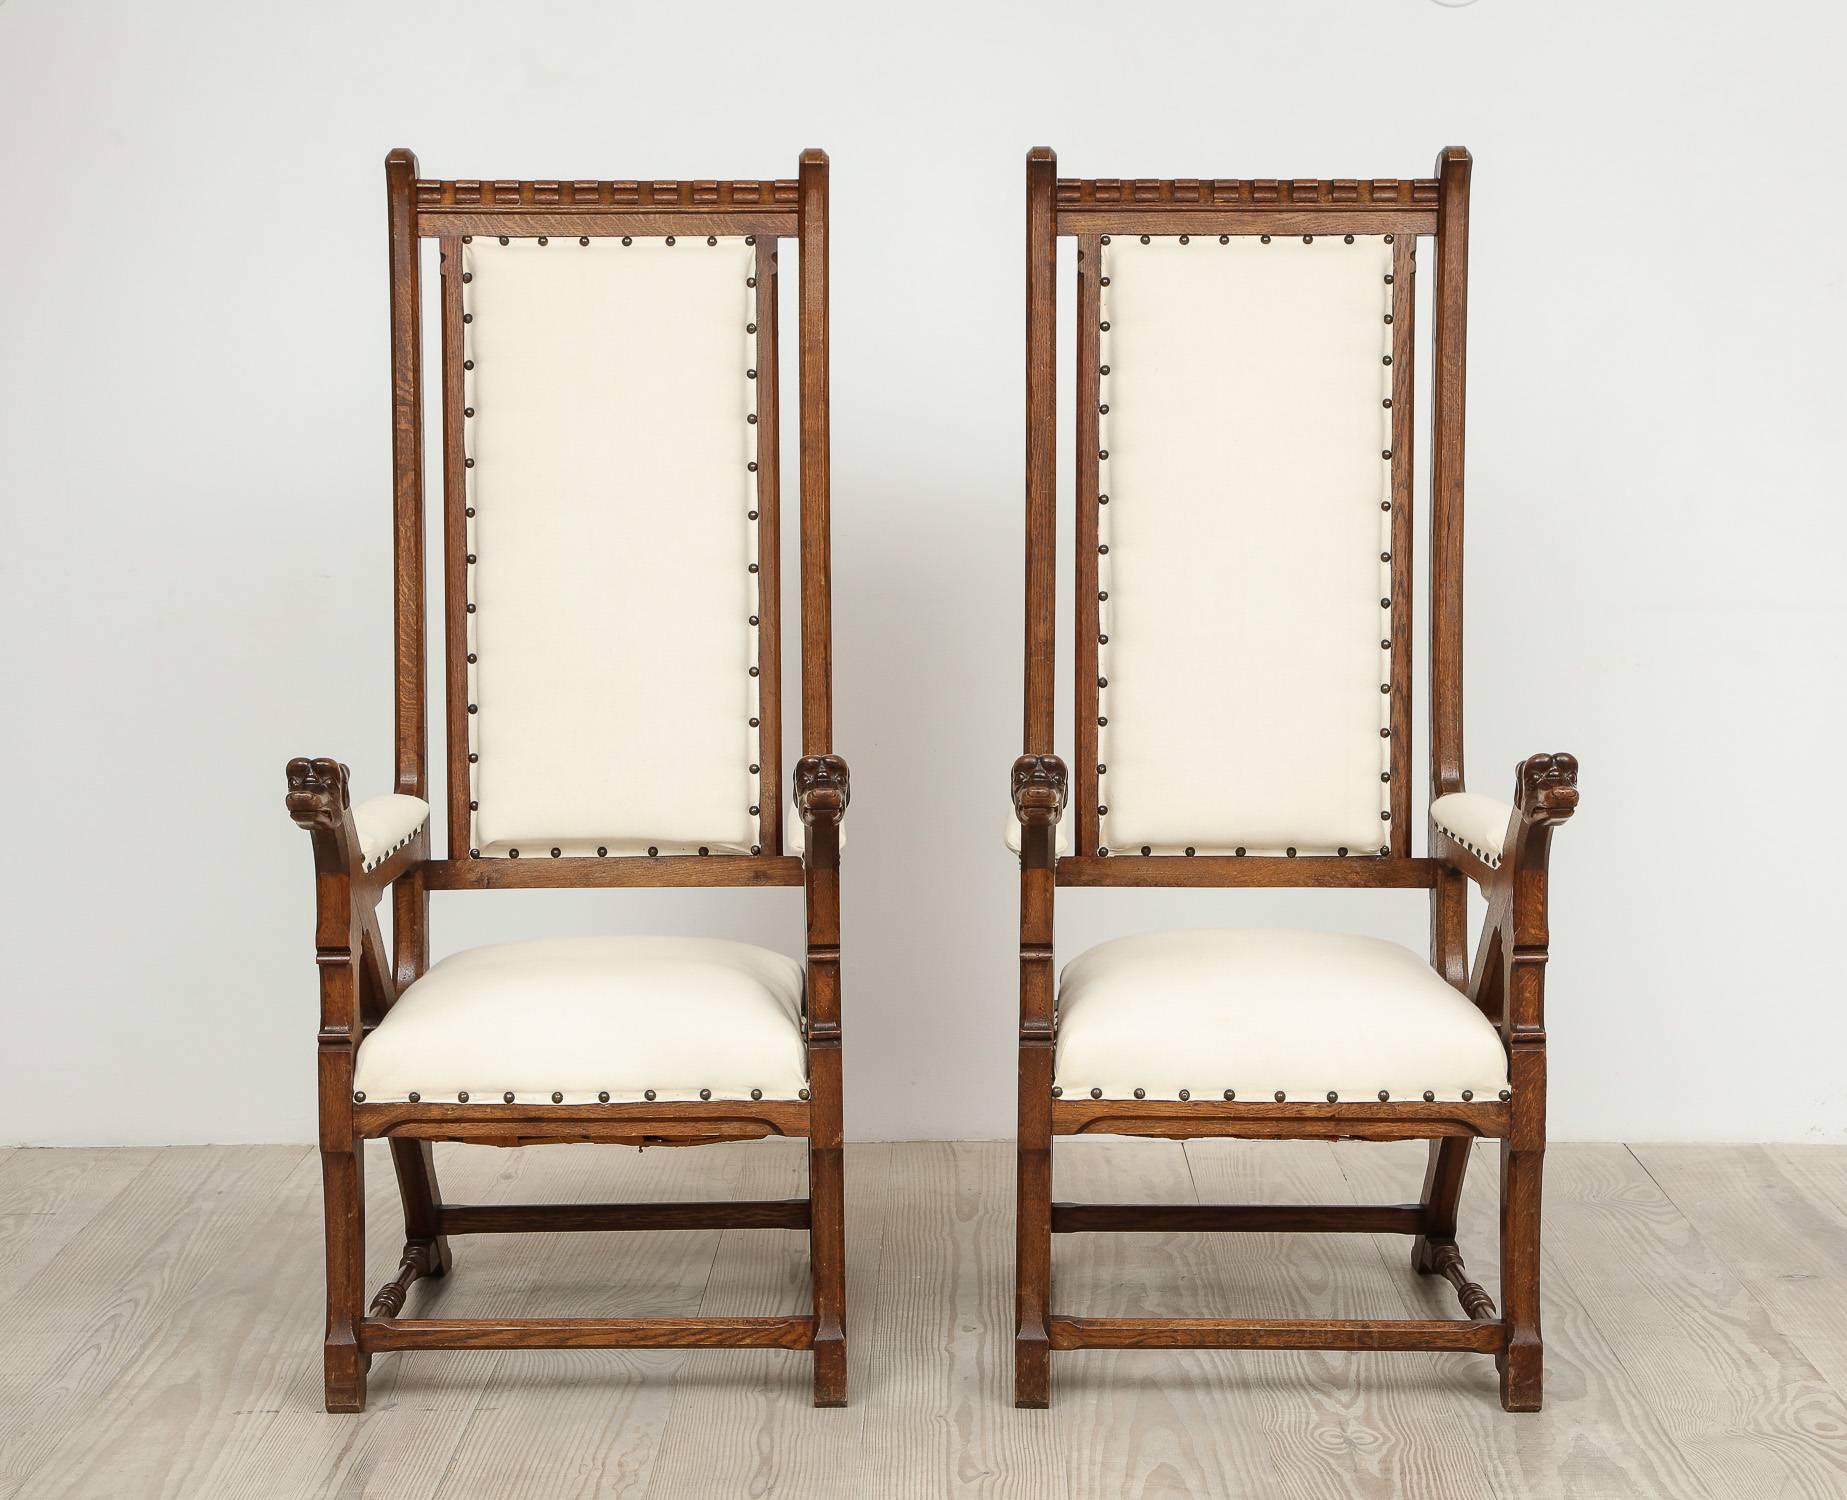 Norwegian Arts & Crafts armchairs with dog heads, a pair (two), circa 1890, origin: Norway.  Beautiful proportions, oversized Arts & Crafts / Gothic Revival armchairs with beautiful carved details such as dog's heads at the tips of each arm. 

We